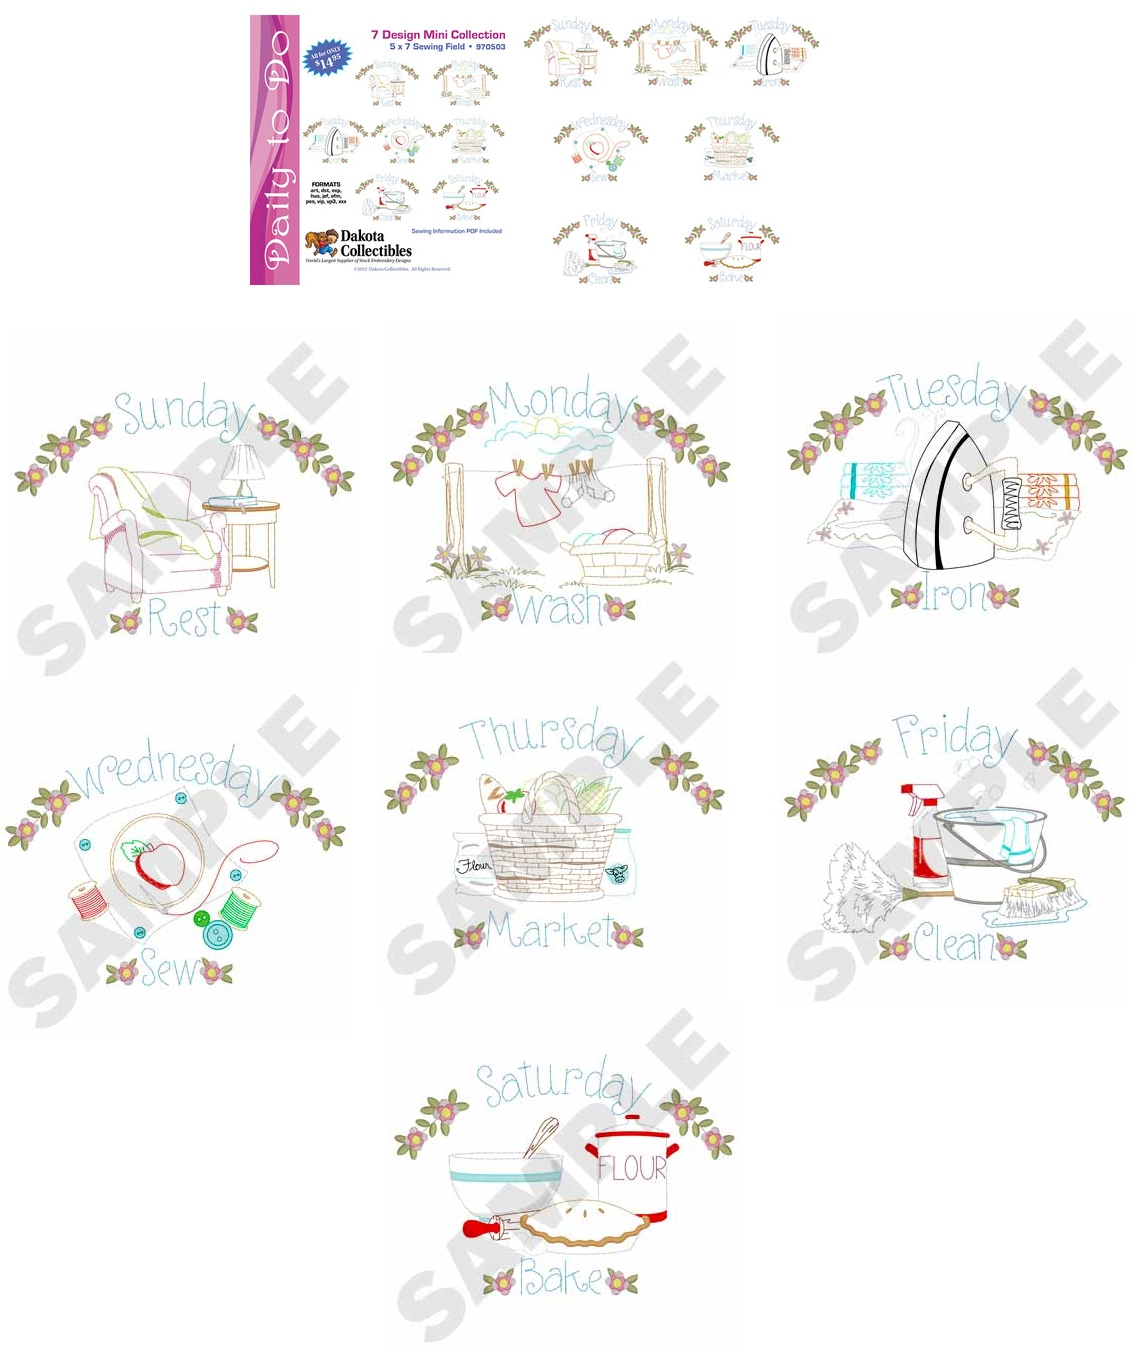 Daily To Do Mini Collection of Embroidery Designs by Dakota Collectibles on a CD-ROM 970503